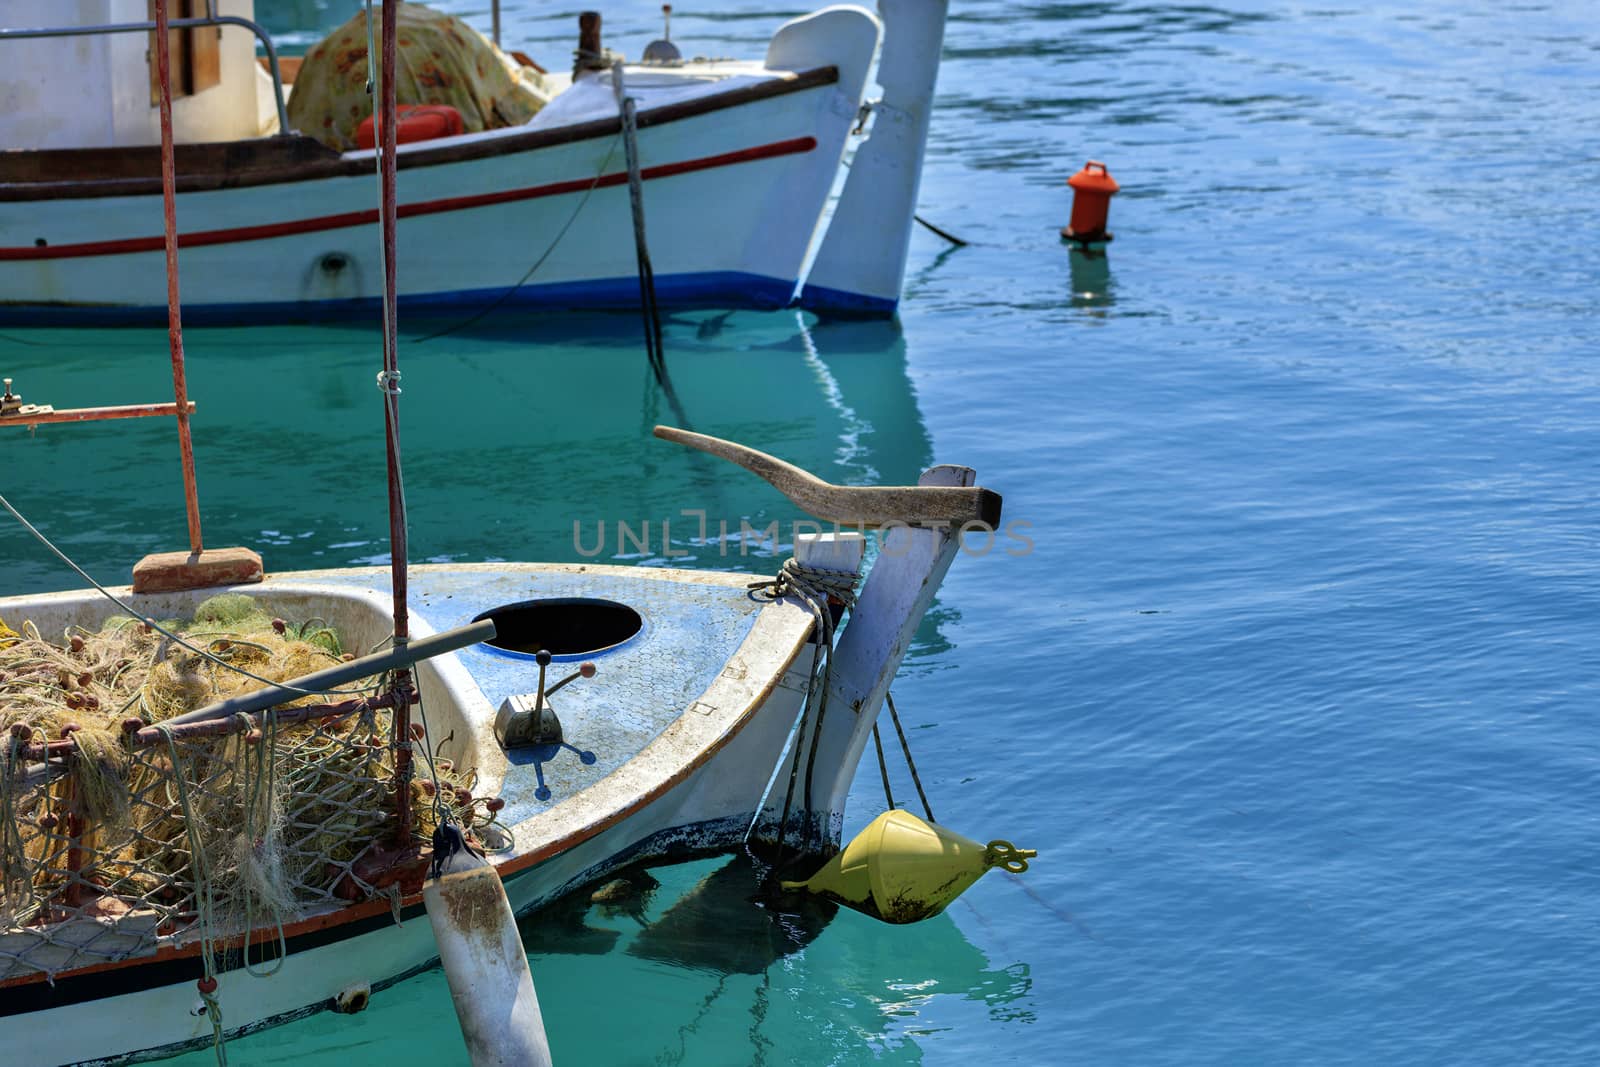 The keels of two old fishing schooners anchored in the clear waters of the Ionian Sea. by Sergii